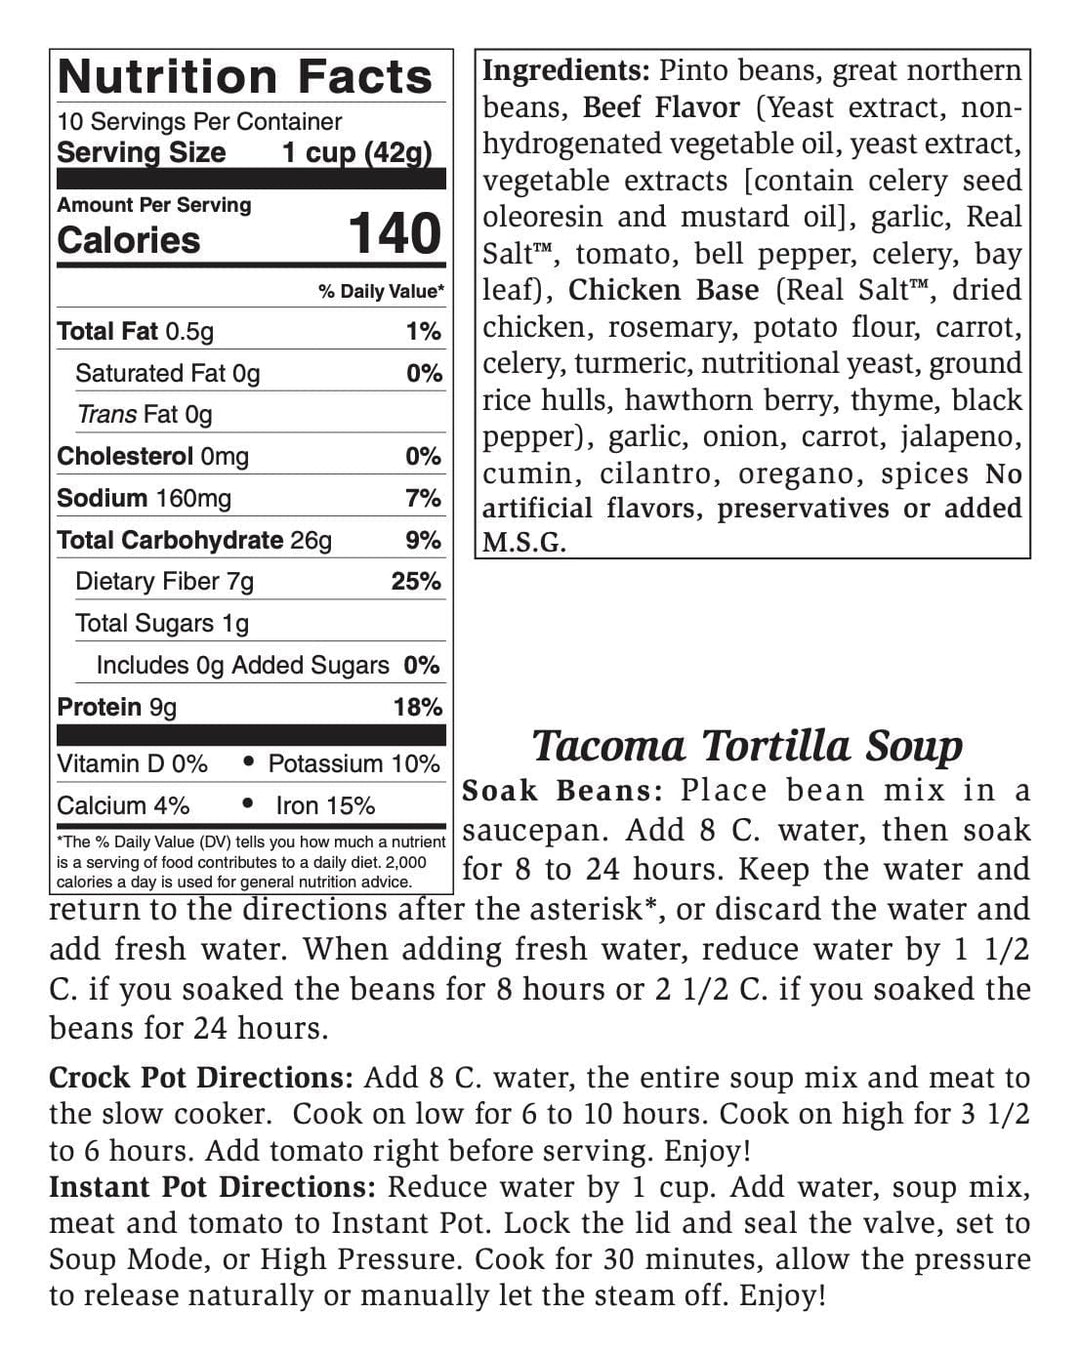 Rill's Specialty Foods Soup Mix Tacoma Tortilla Soup - Small